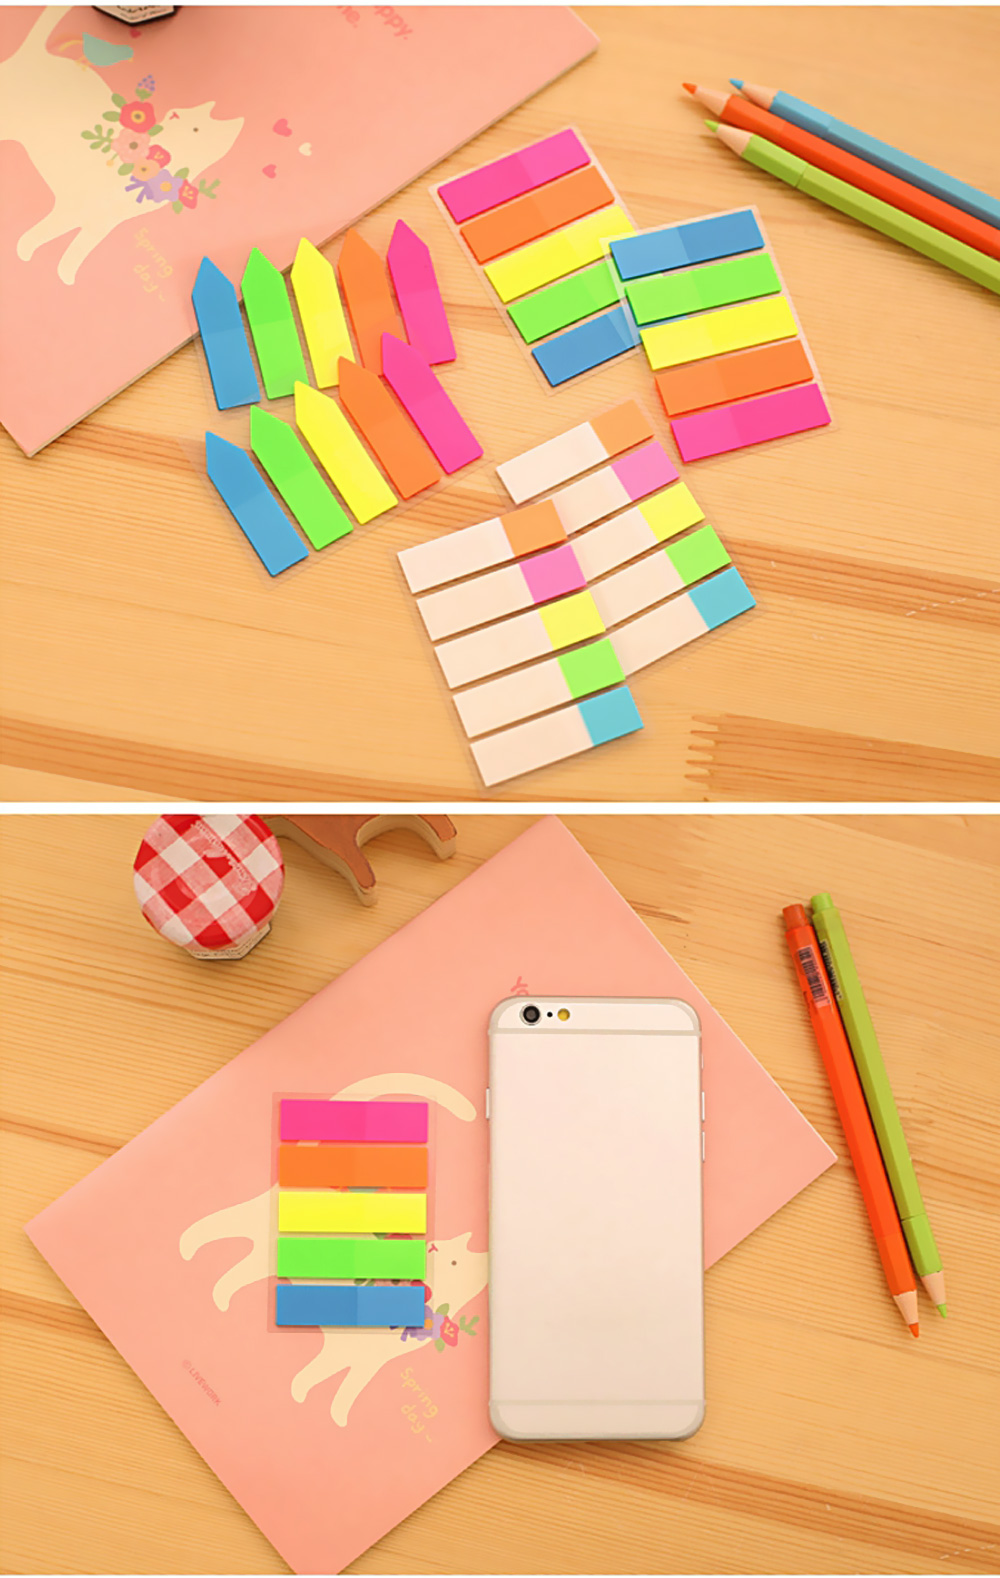 Fluorescent Index Sticker Bookmark Memo Pad Tab Sticky Notes Office School Supplies Stationery